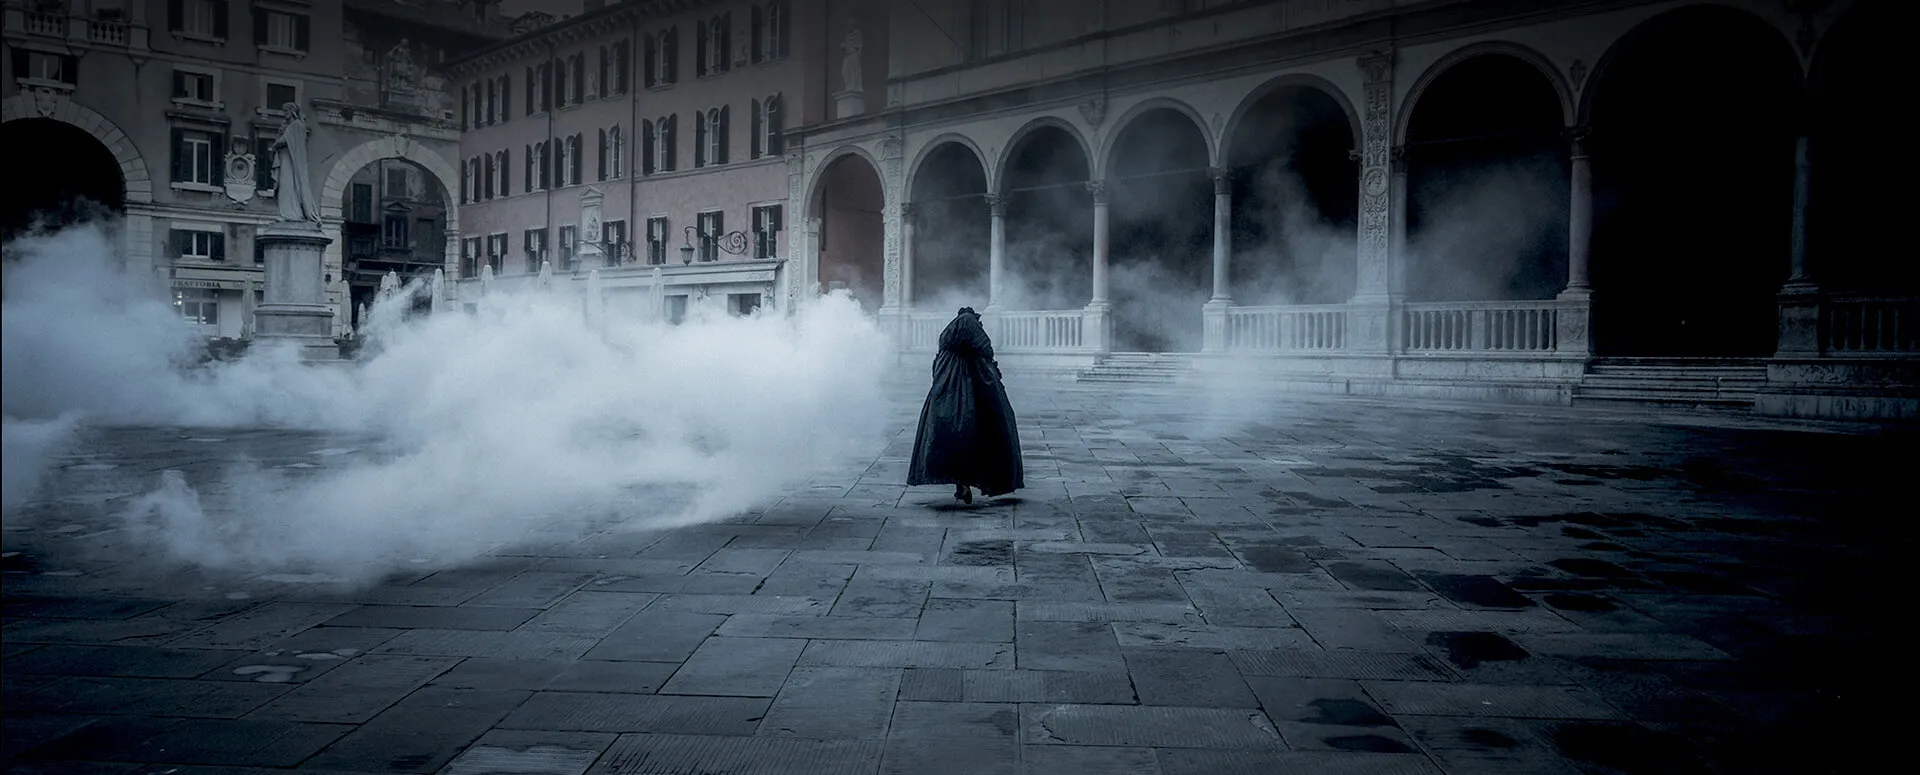 Together with a short art film, Paolo Roversi from Pirelli searches for the essence of Juliet